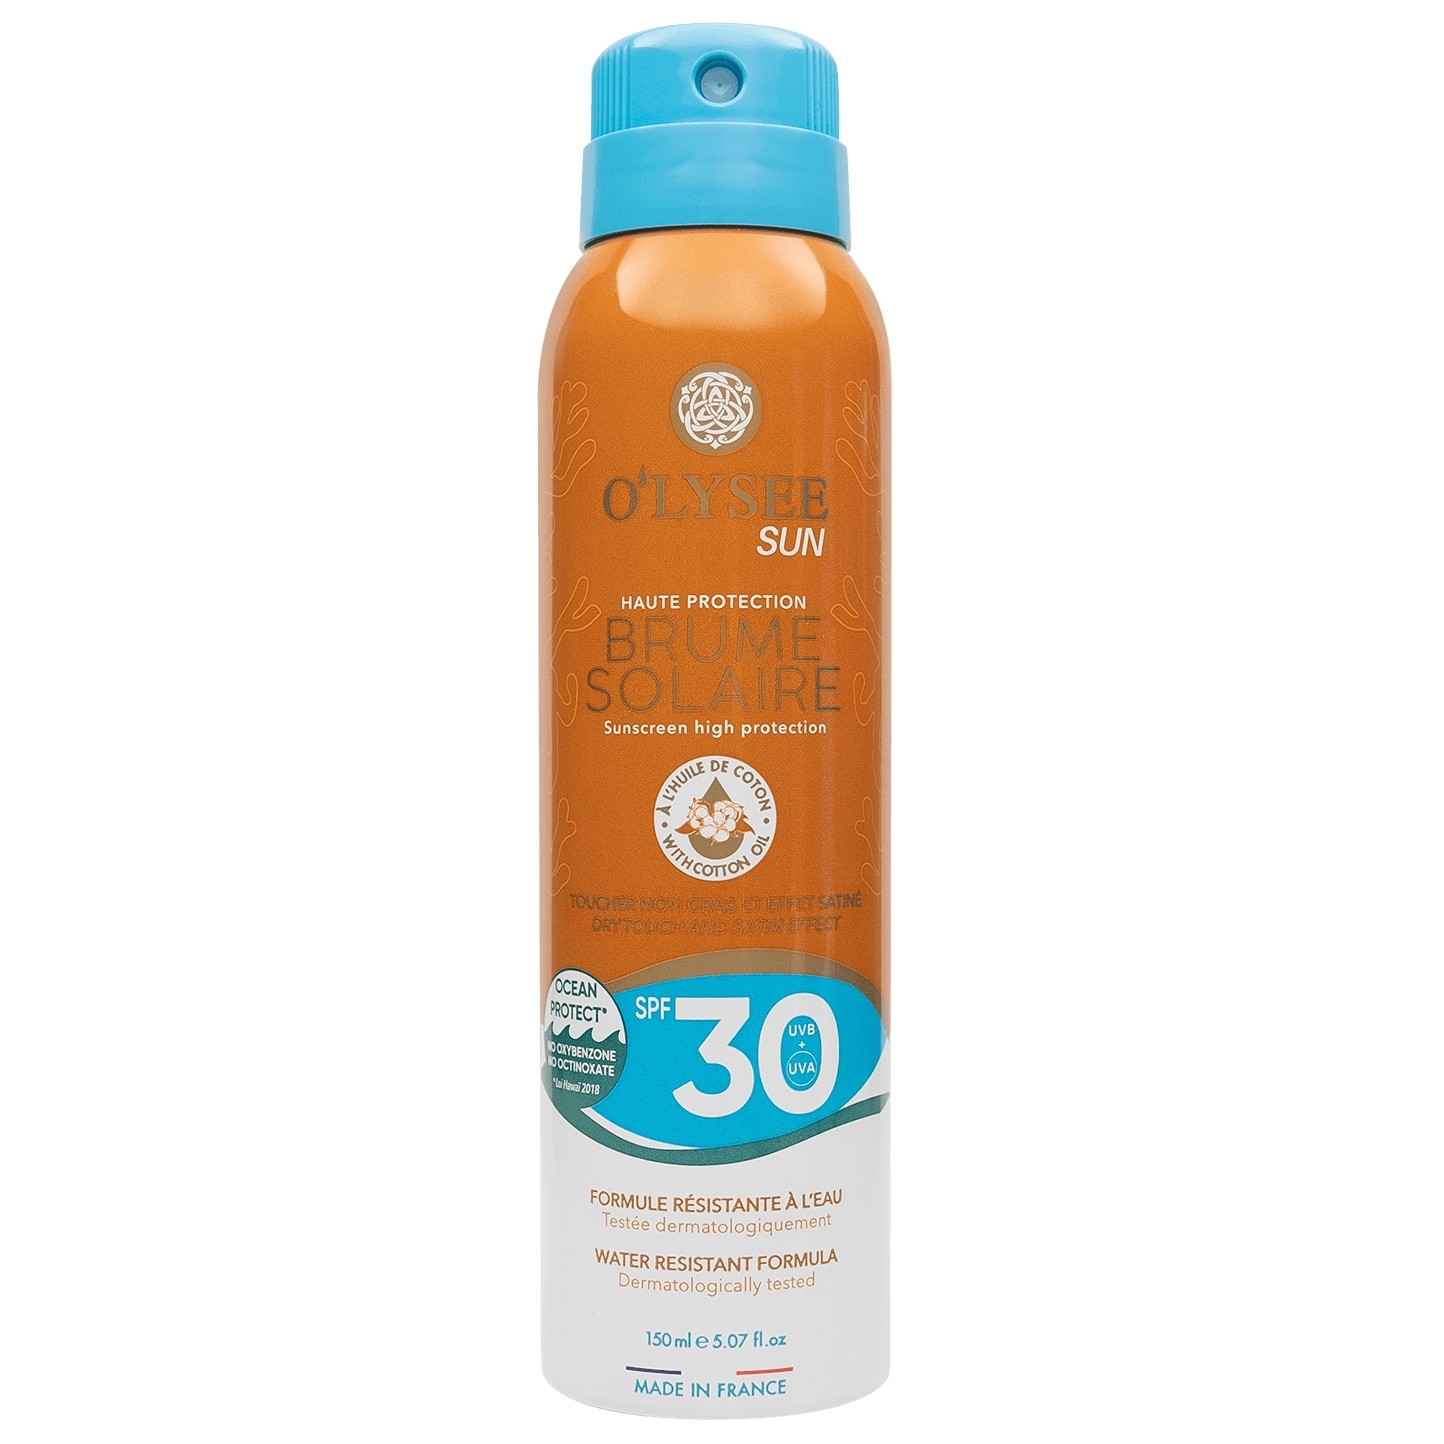 Brume solaire haute protection SPF30 - O’LYSEE